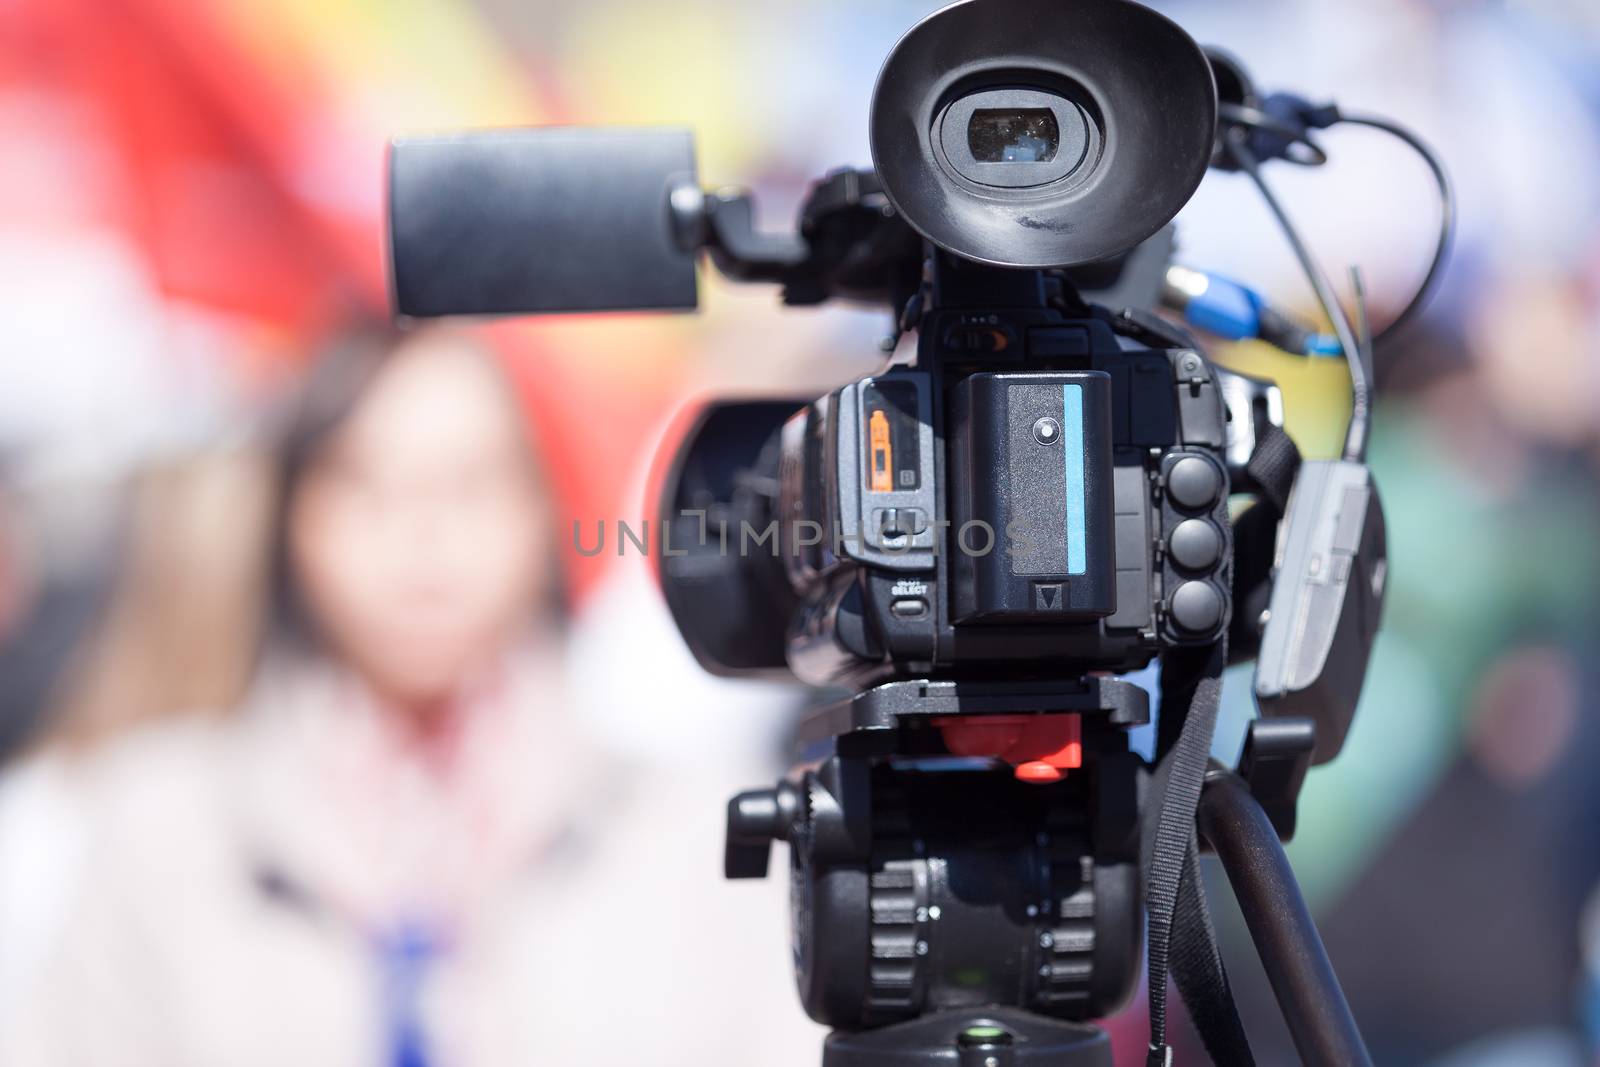 Video camera in the focus, blurred female reporter in the backgr by wellphoto